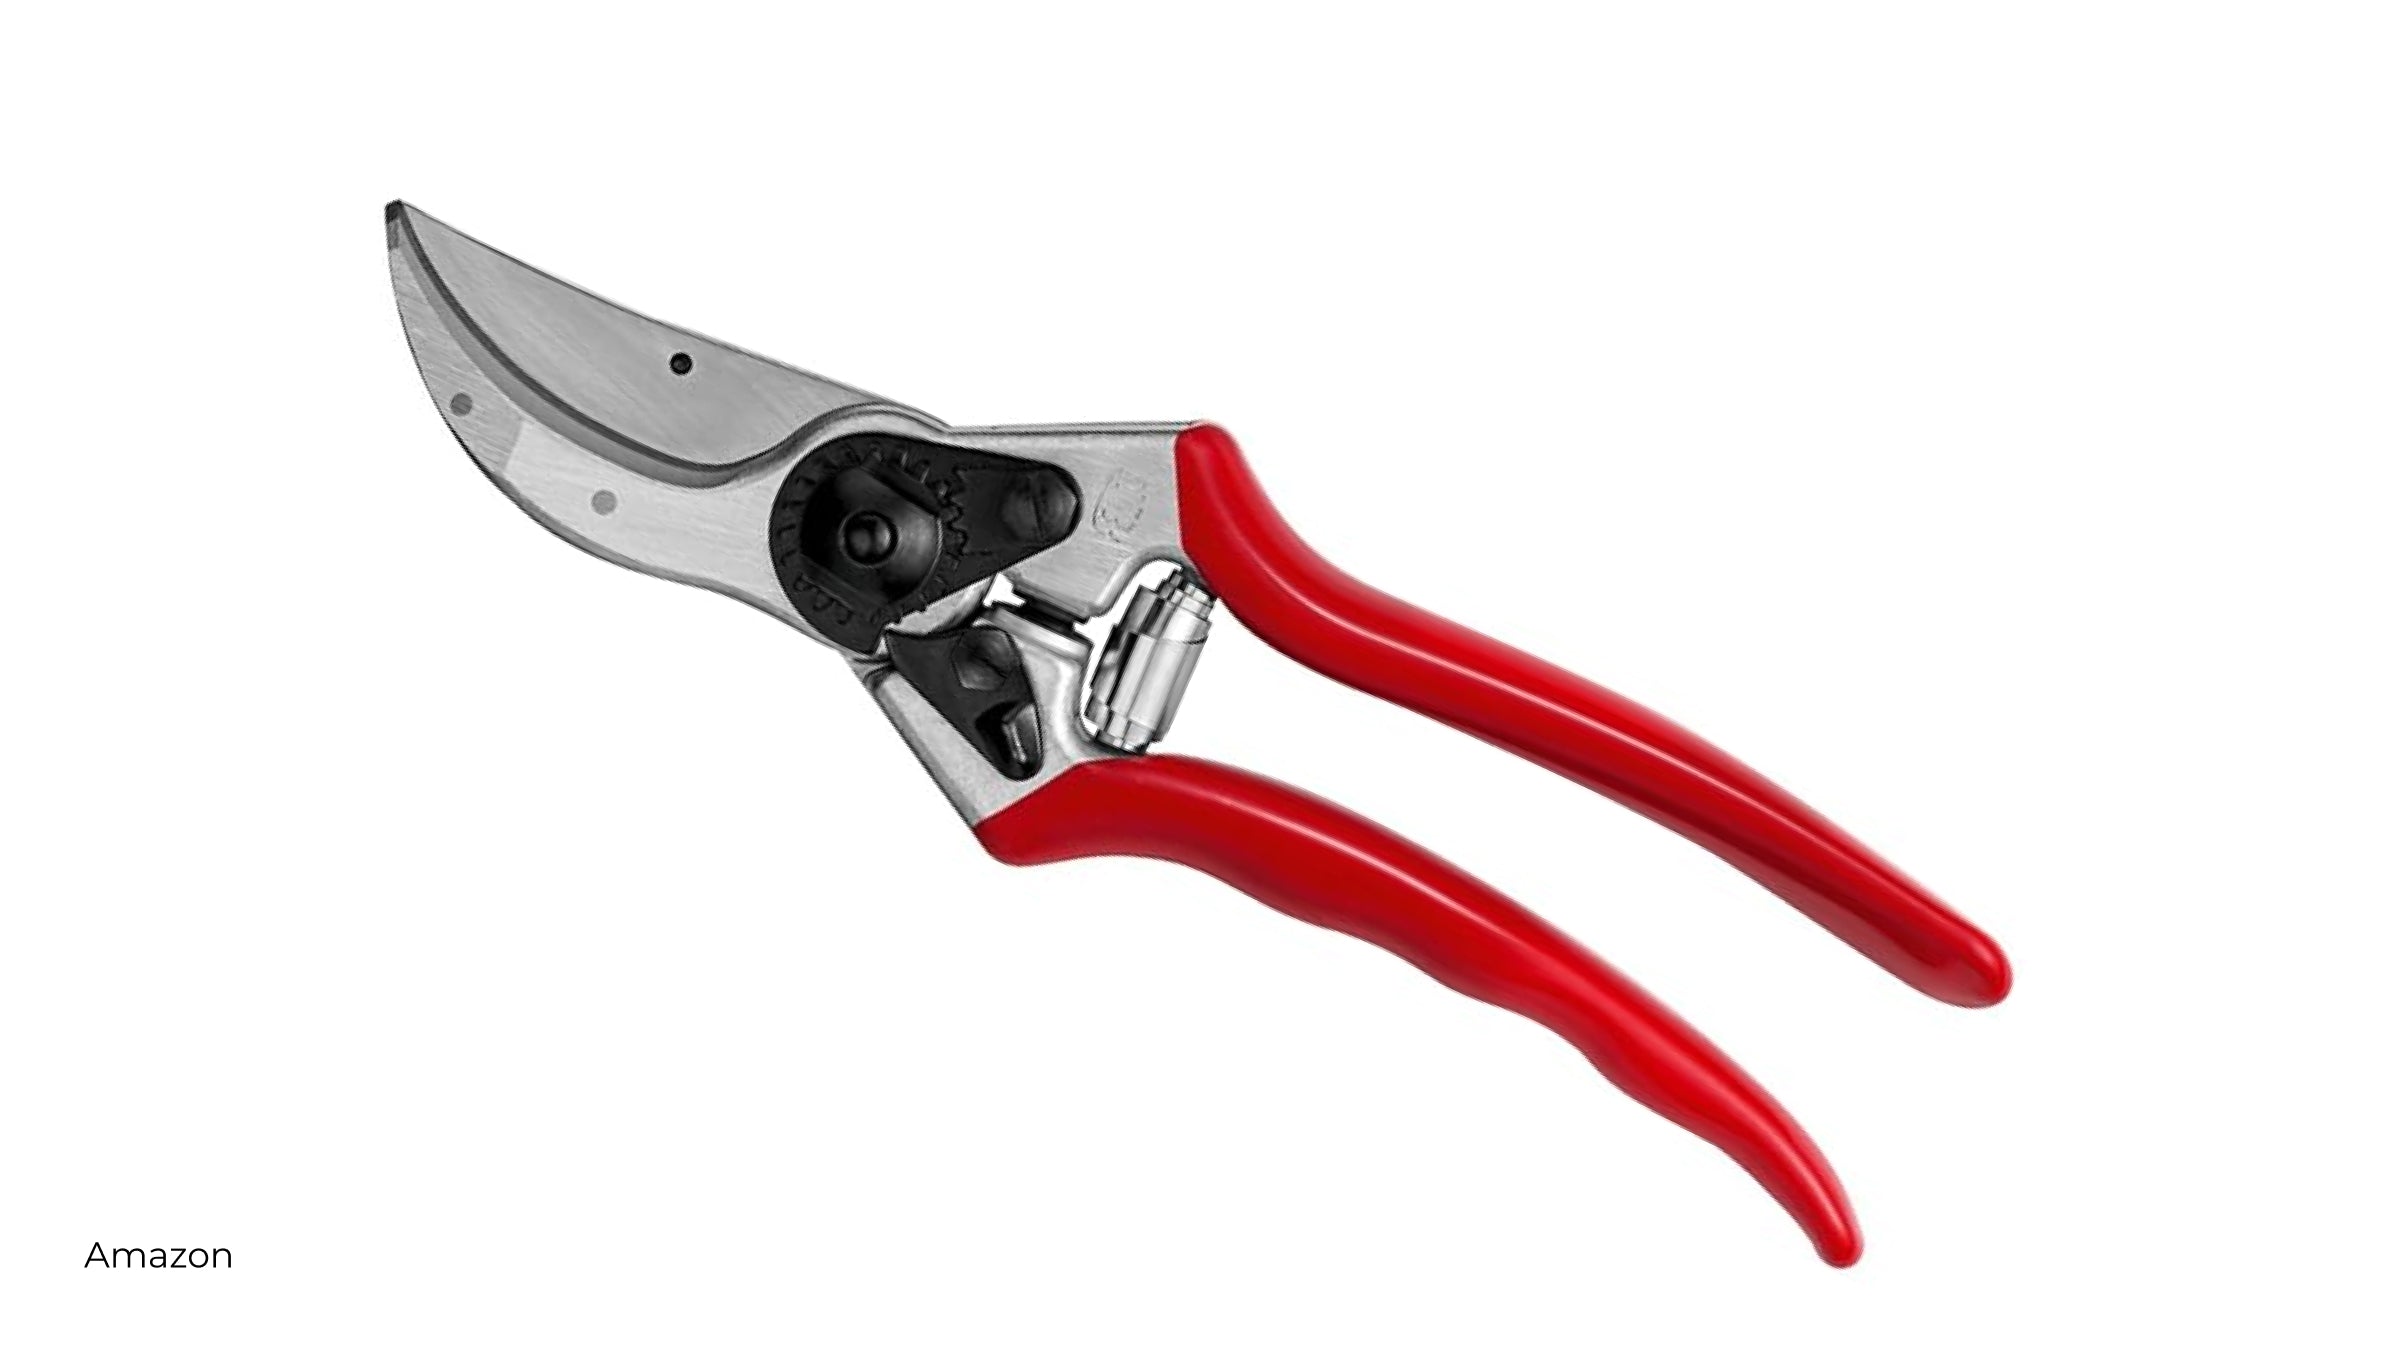 Hand pruner with silver blades and red handles from Amazon